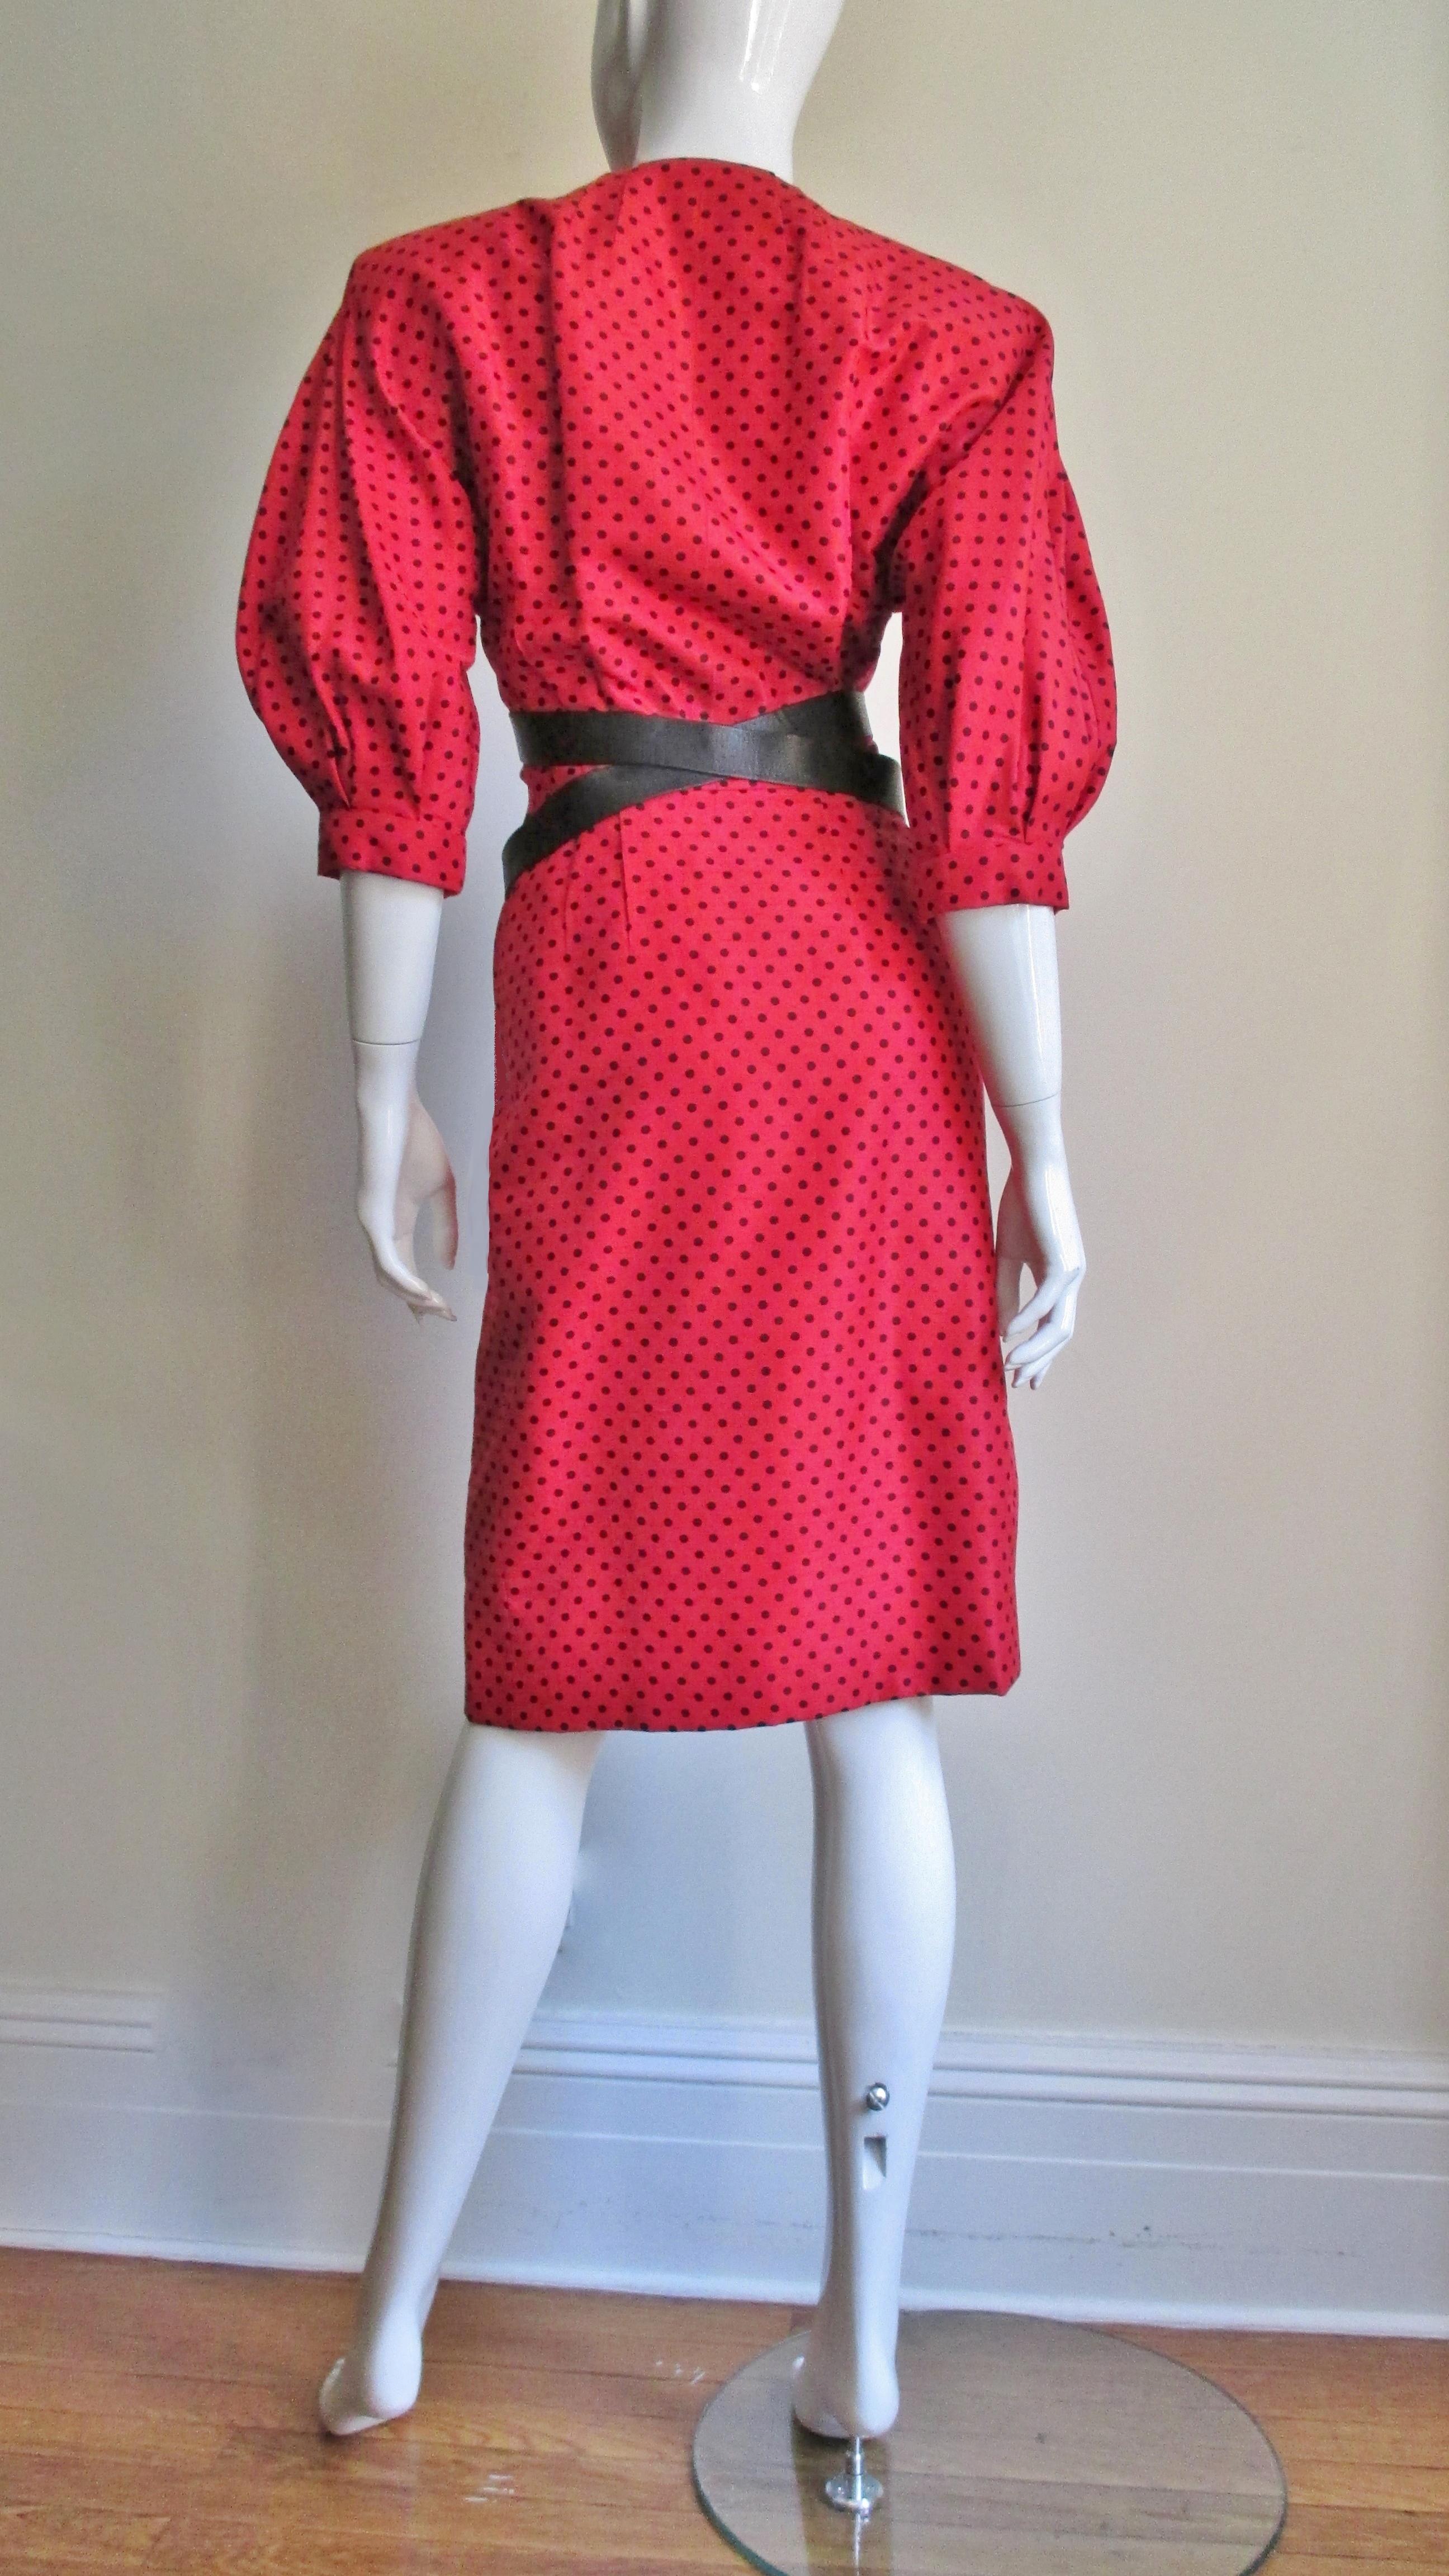 Jacqueline de Ribes Silk Dress With Leather Straps 1980s For Sale 7